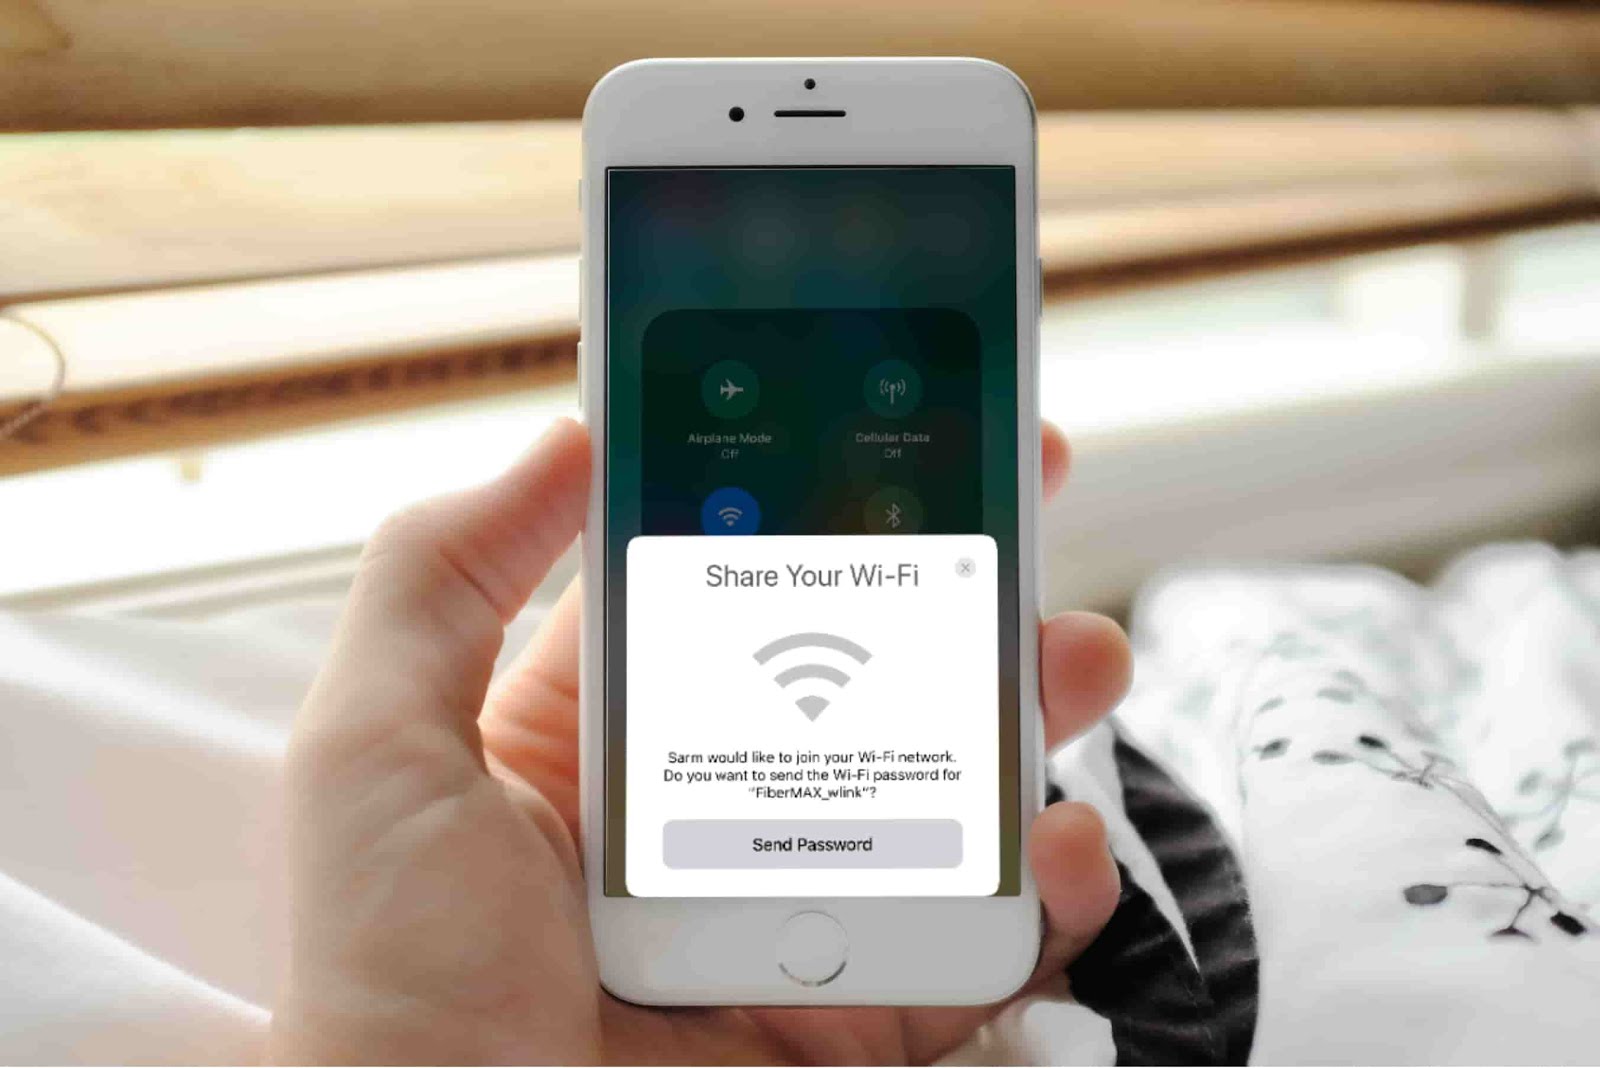 iOS 11 has a hidden Wifi hacks that lets you to share WiFi password in iOS 11 with nearby iOS devices without entering Wifi Password